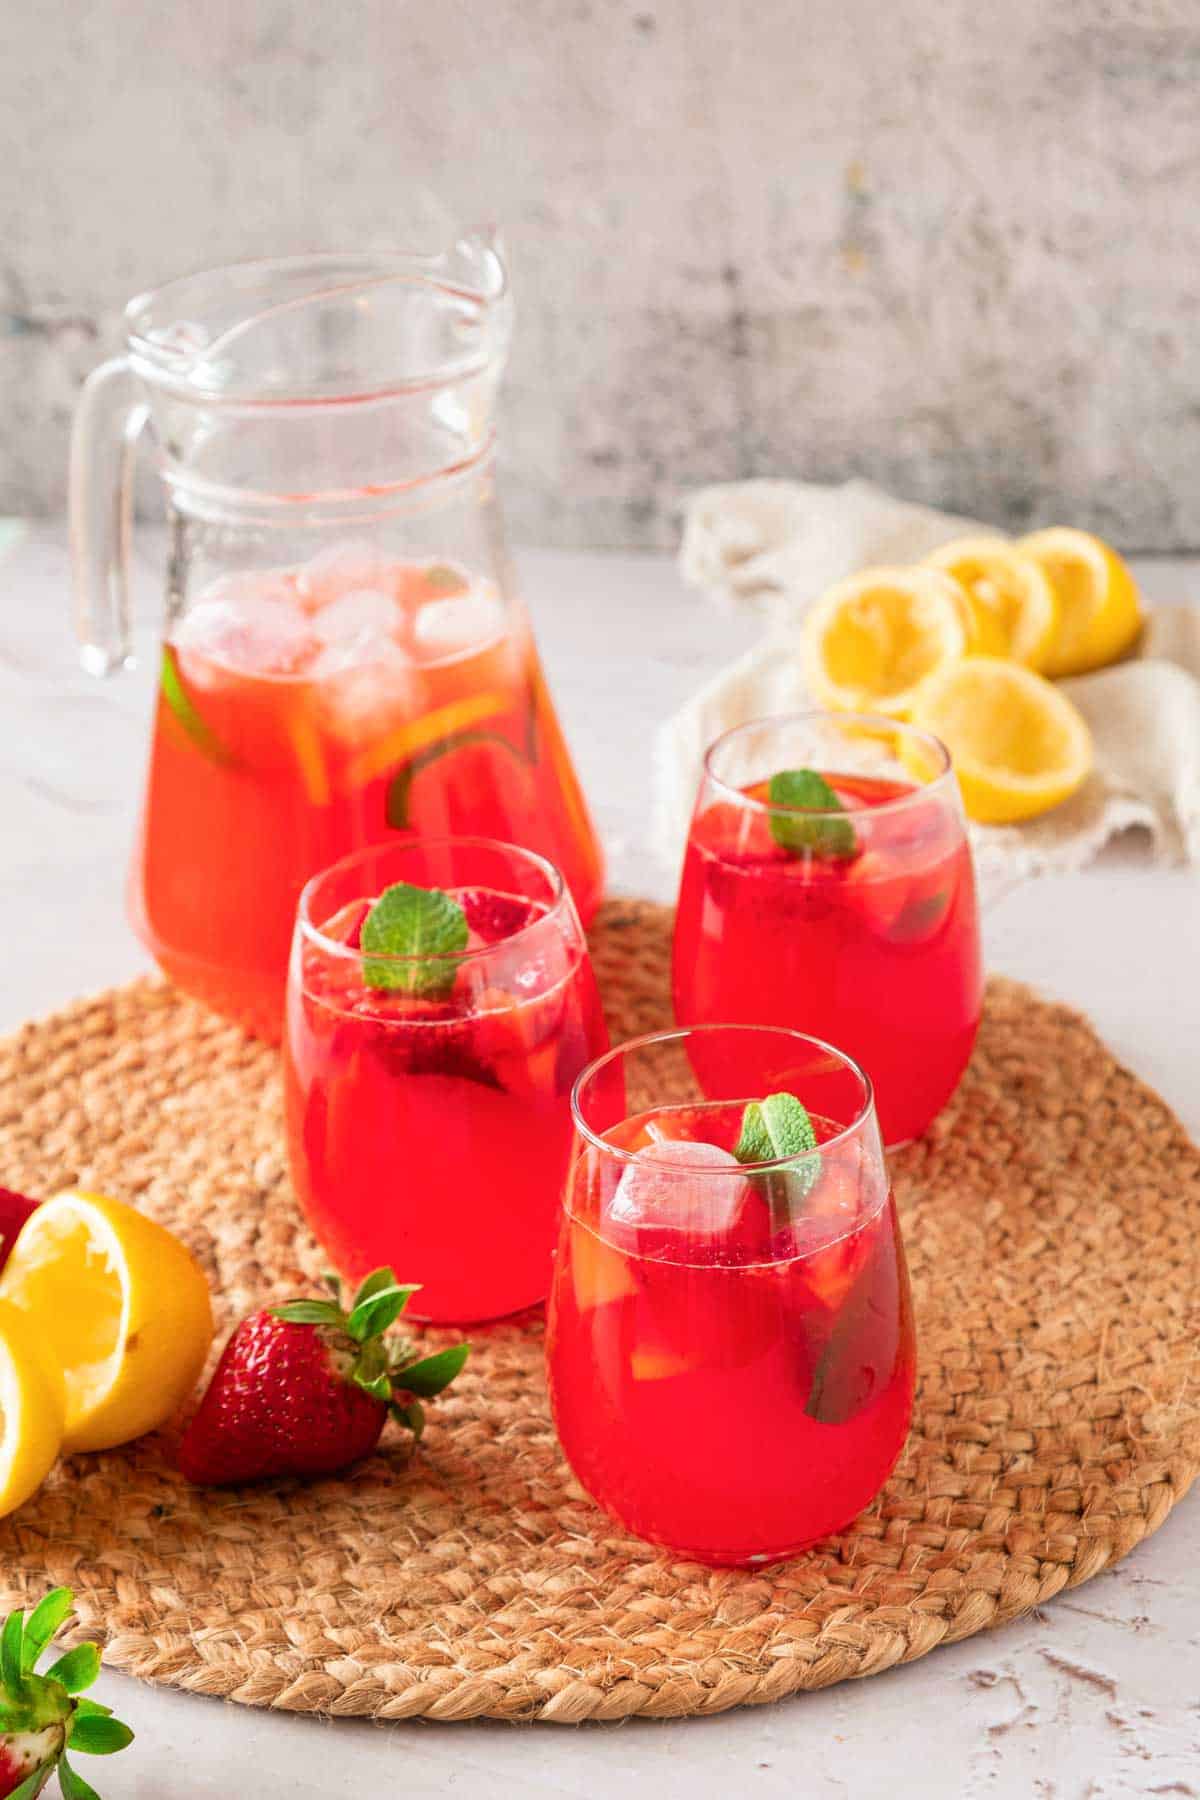 A jug and glasses of strawberry lemonade on a table surrounded by squeezed lemons and strawberries.